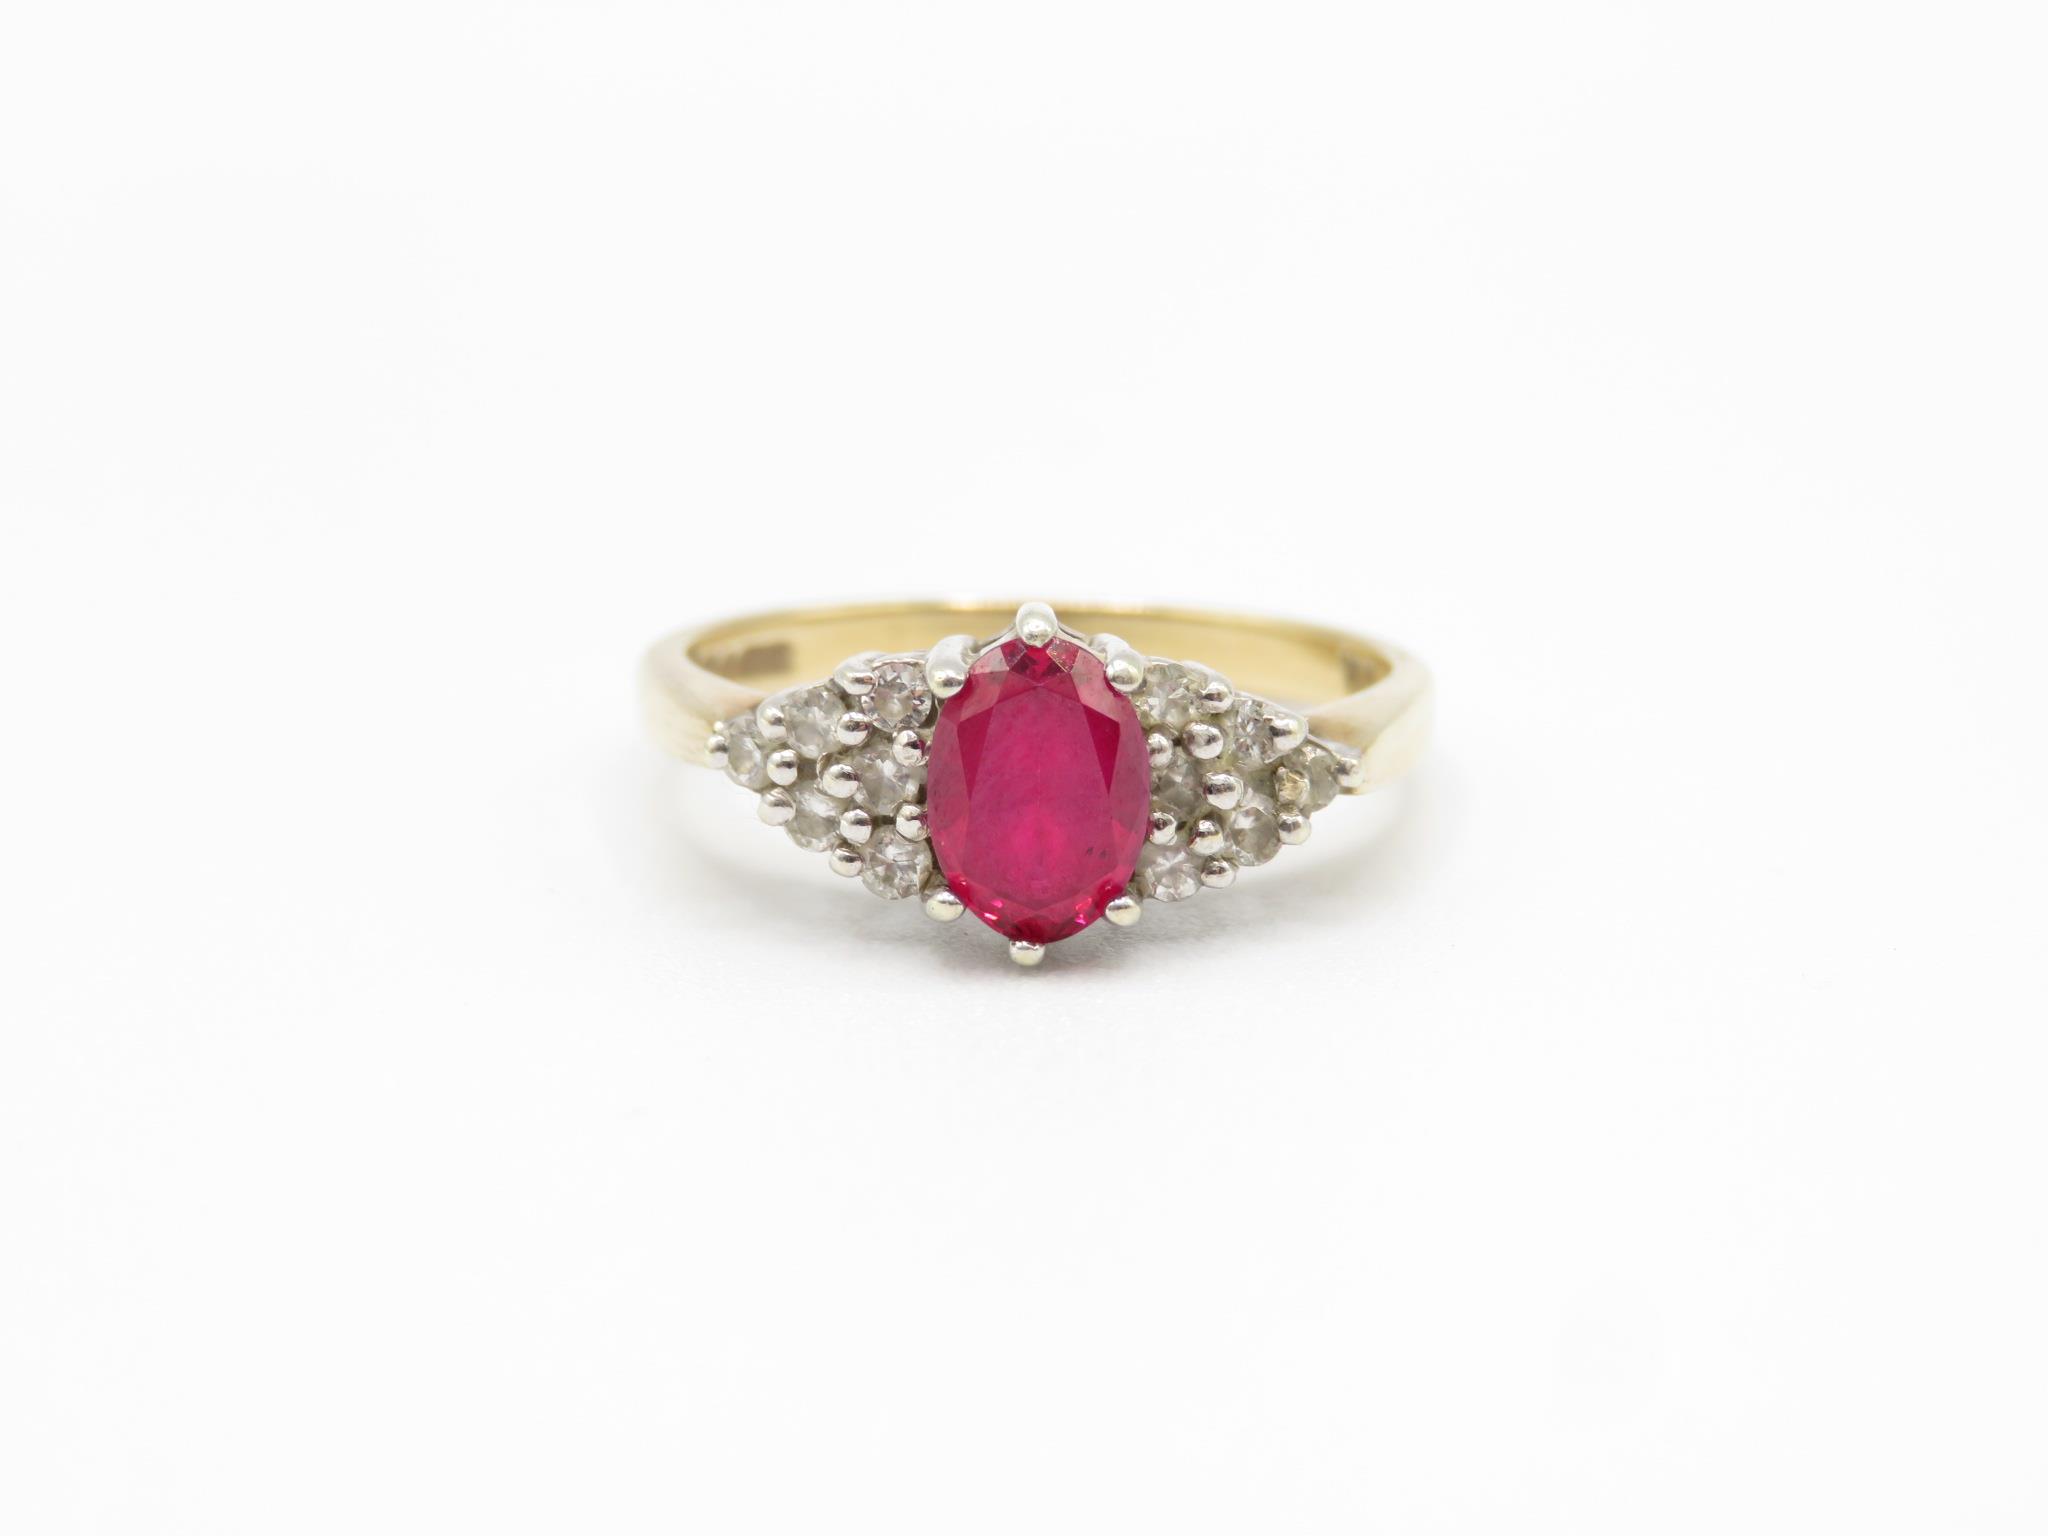 9ct Gold Diamond & Synthetic Ruby Dress Ring (2.9g) Size N.5 - Image 2 of 4